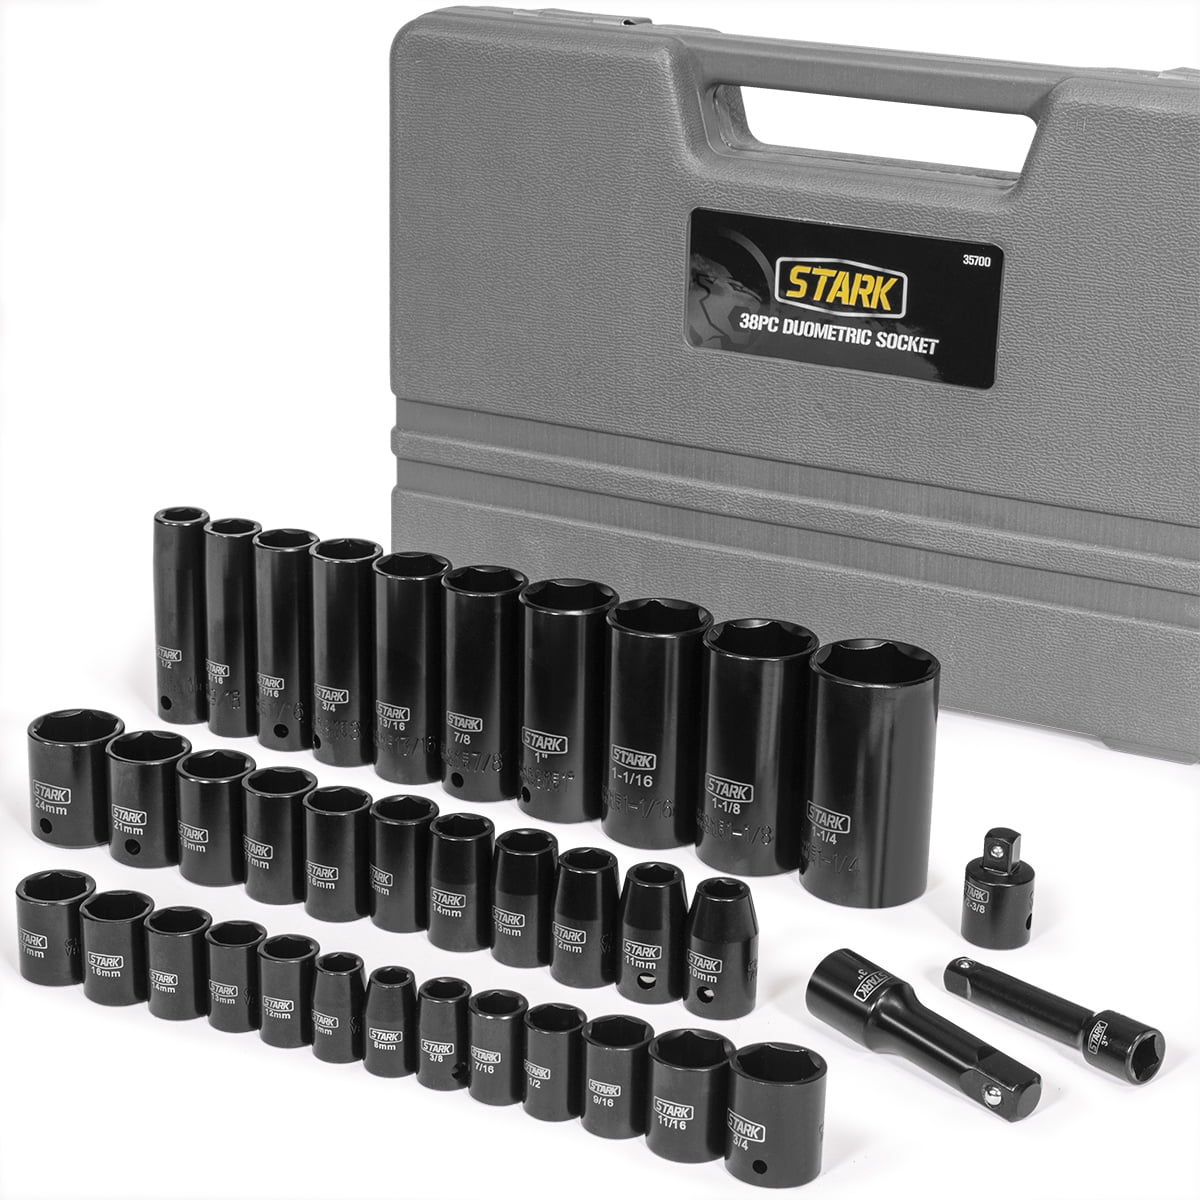 8 Piece 3/4 inch Drive SAE Deep Wall Impact Socket Set with Storage Case 